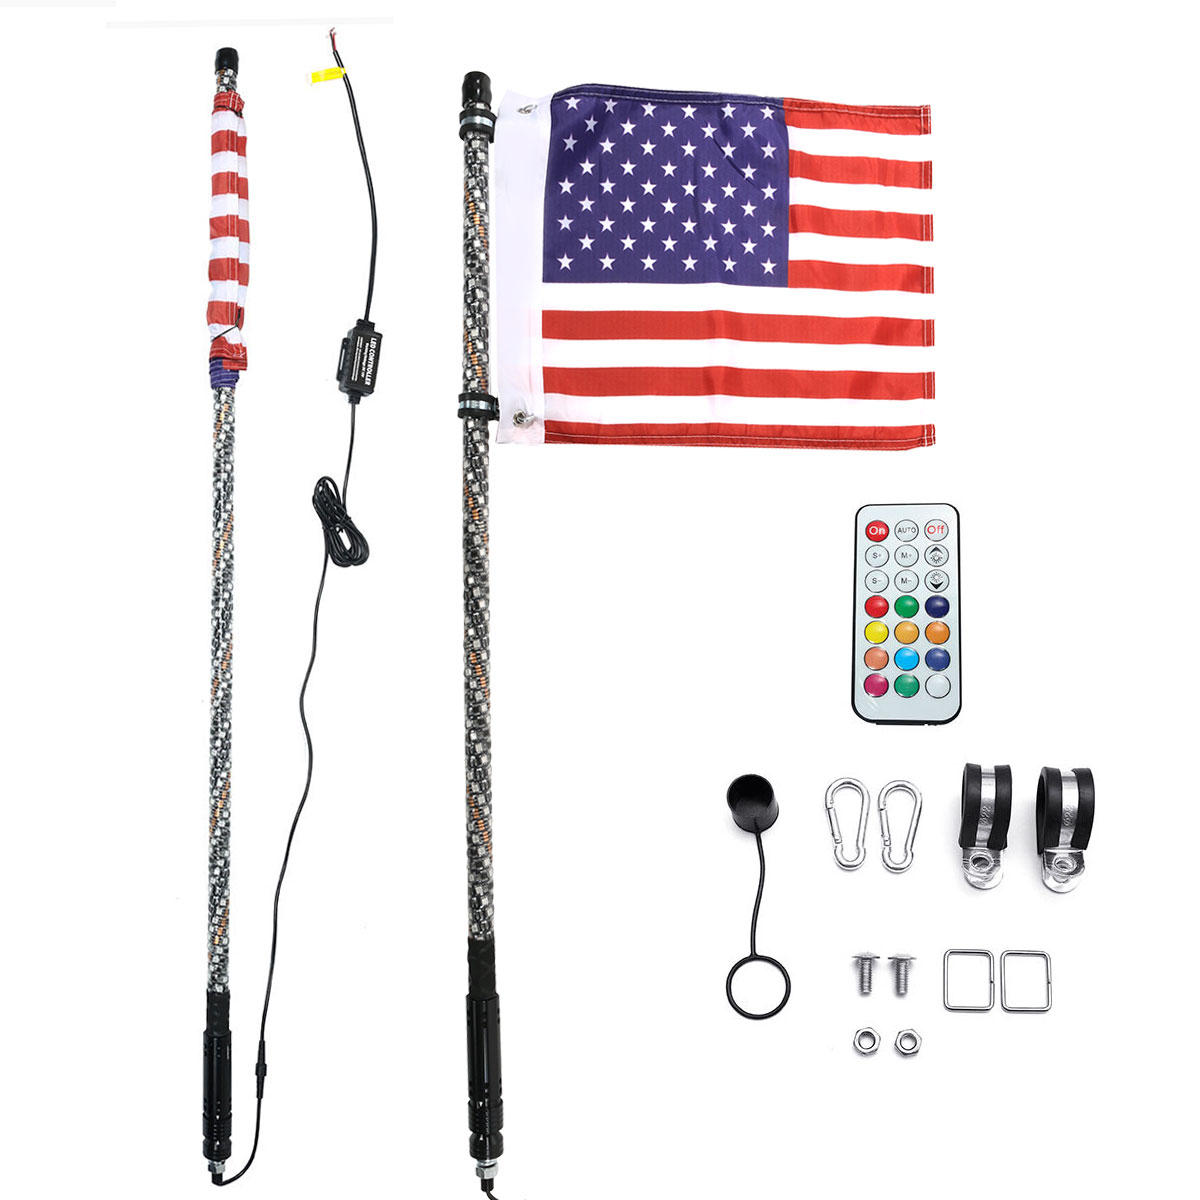 12V 3FT/4FT/5FT LED 4WD Strip RGB Color Whip America USA Flag Light With Remote Control For Jeep ATV UTV RZR Motorcycle